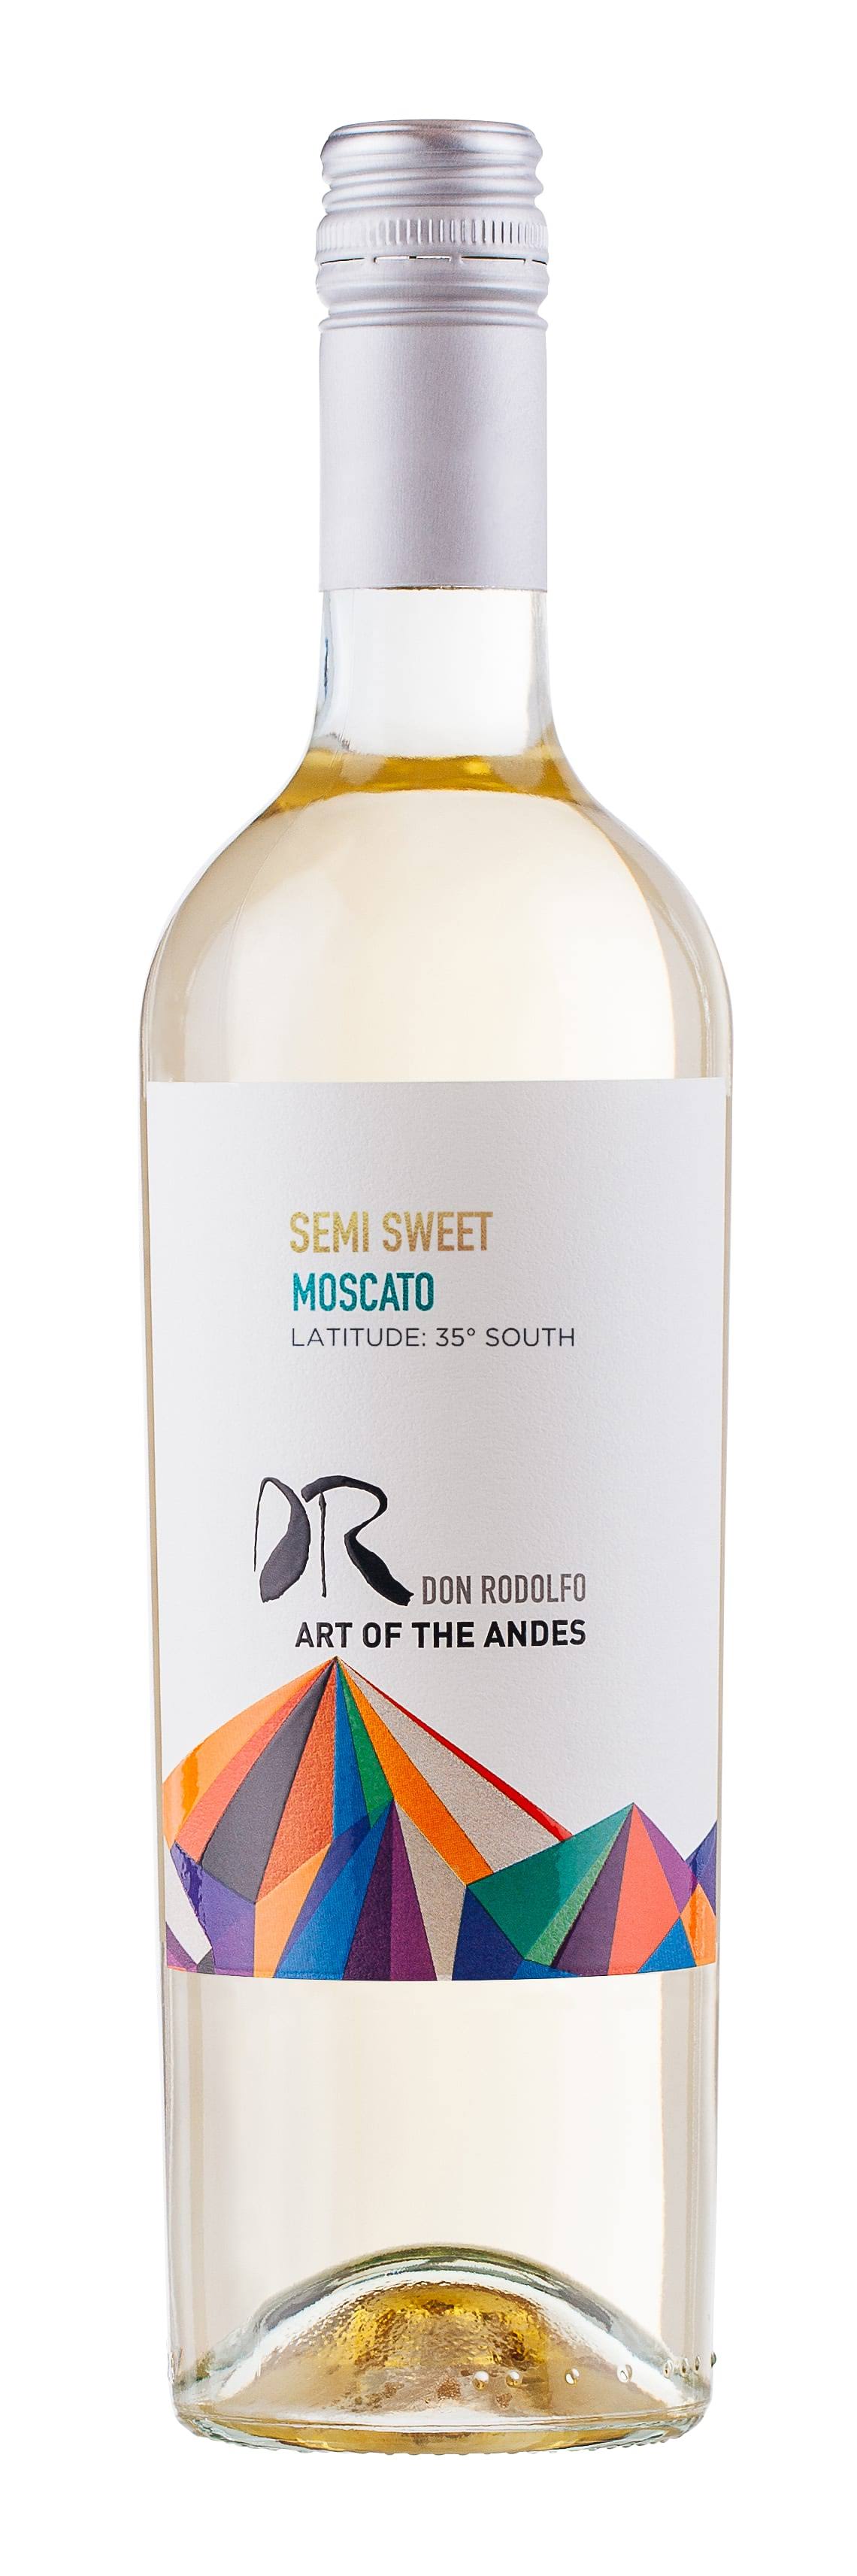 Don Rodolfo Moscato 2015 White Wine from South America - 750ml